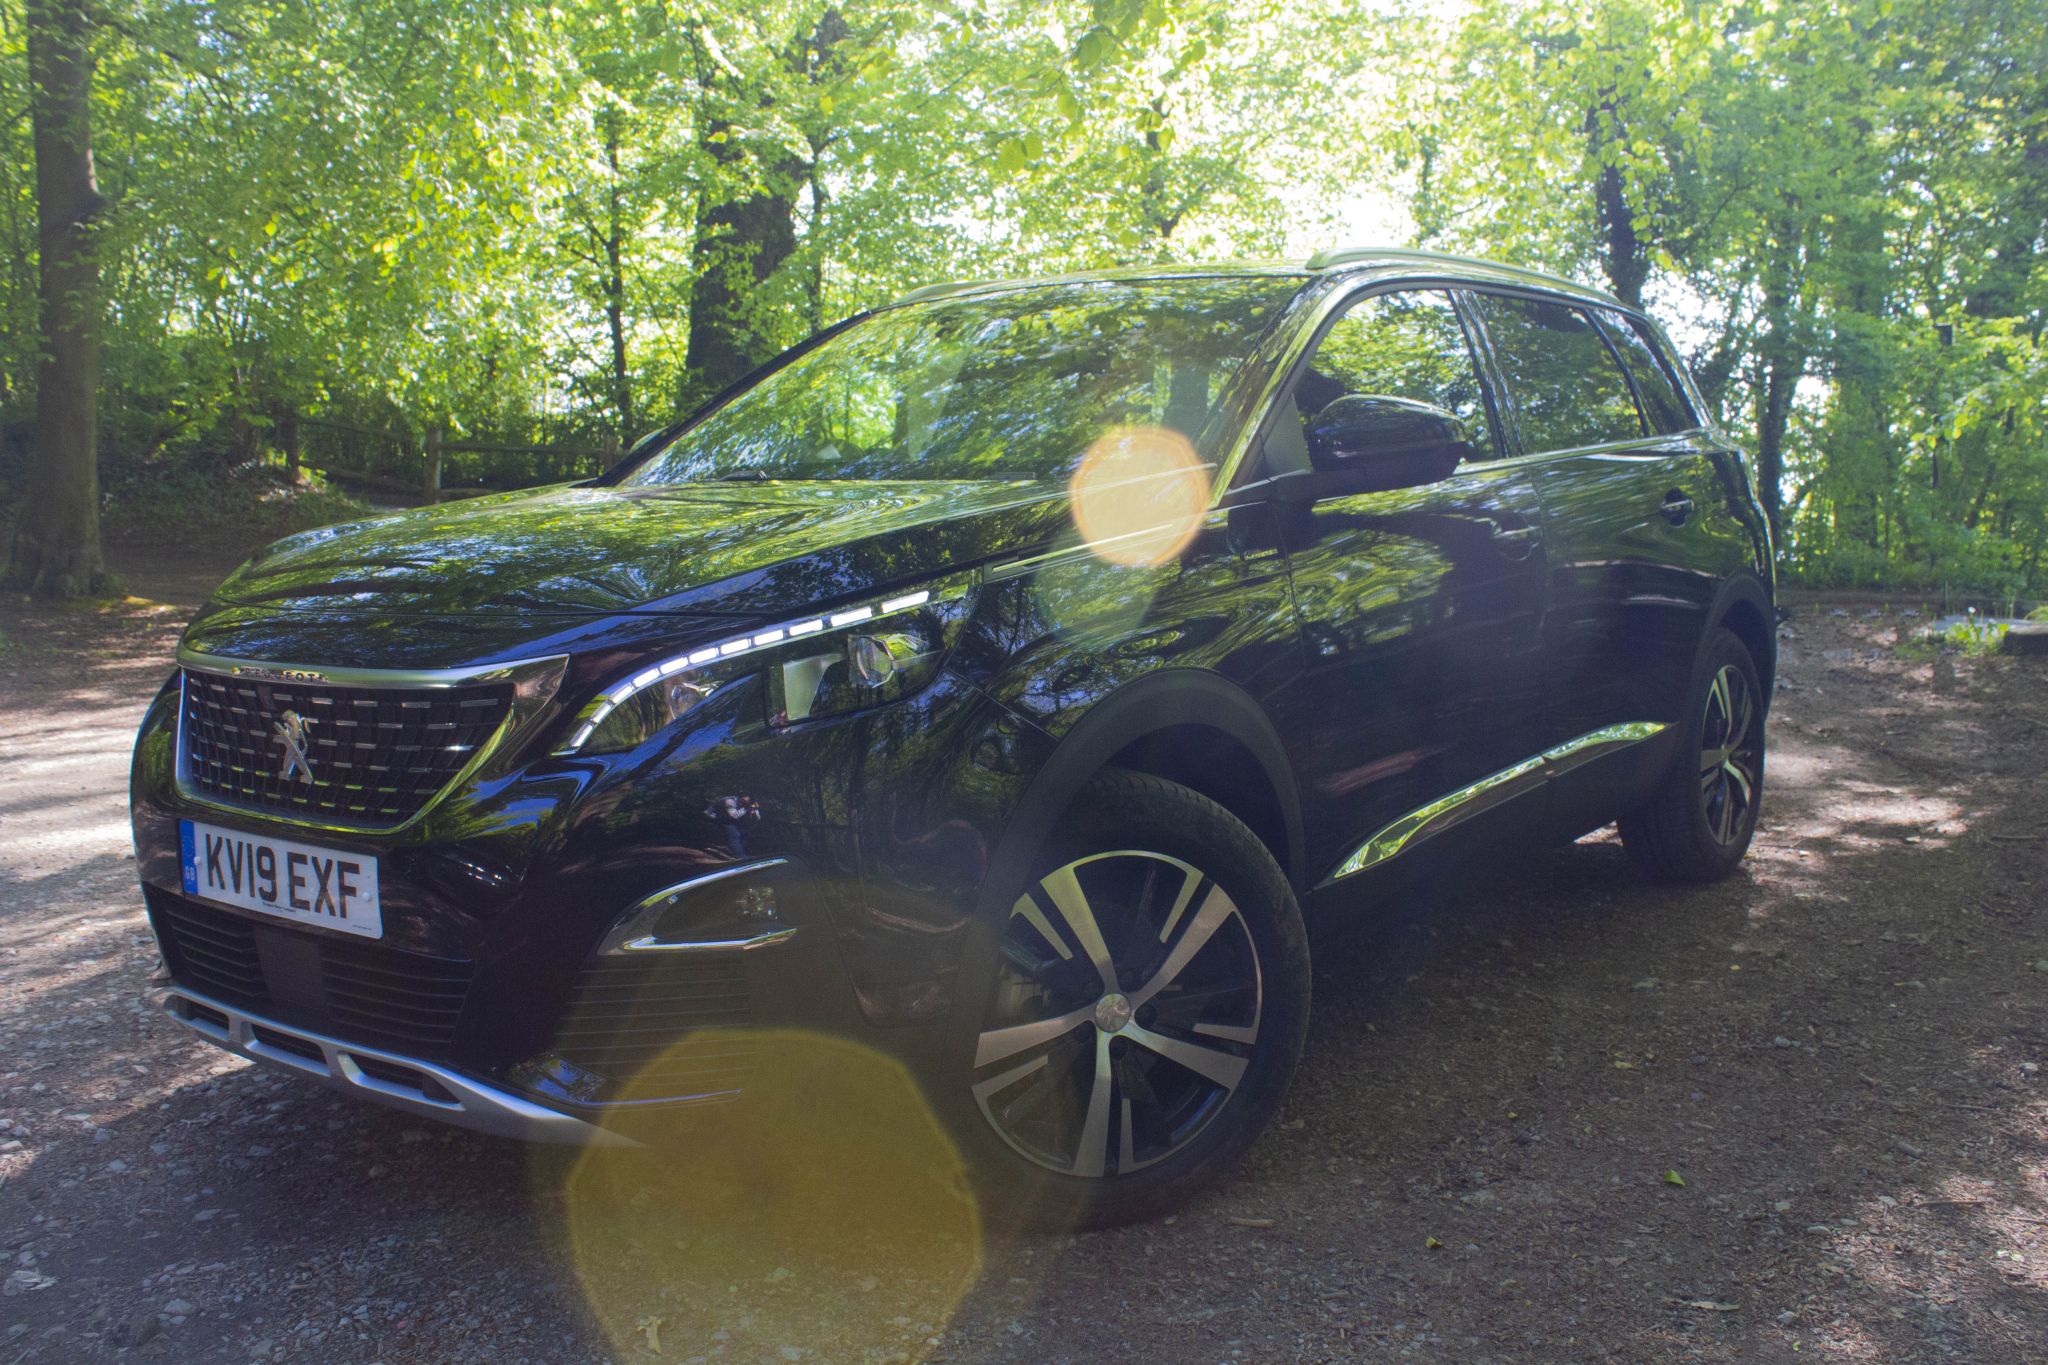 Peugeot 5008 GT: I am in love with this car - Dad Blog UK